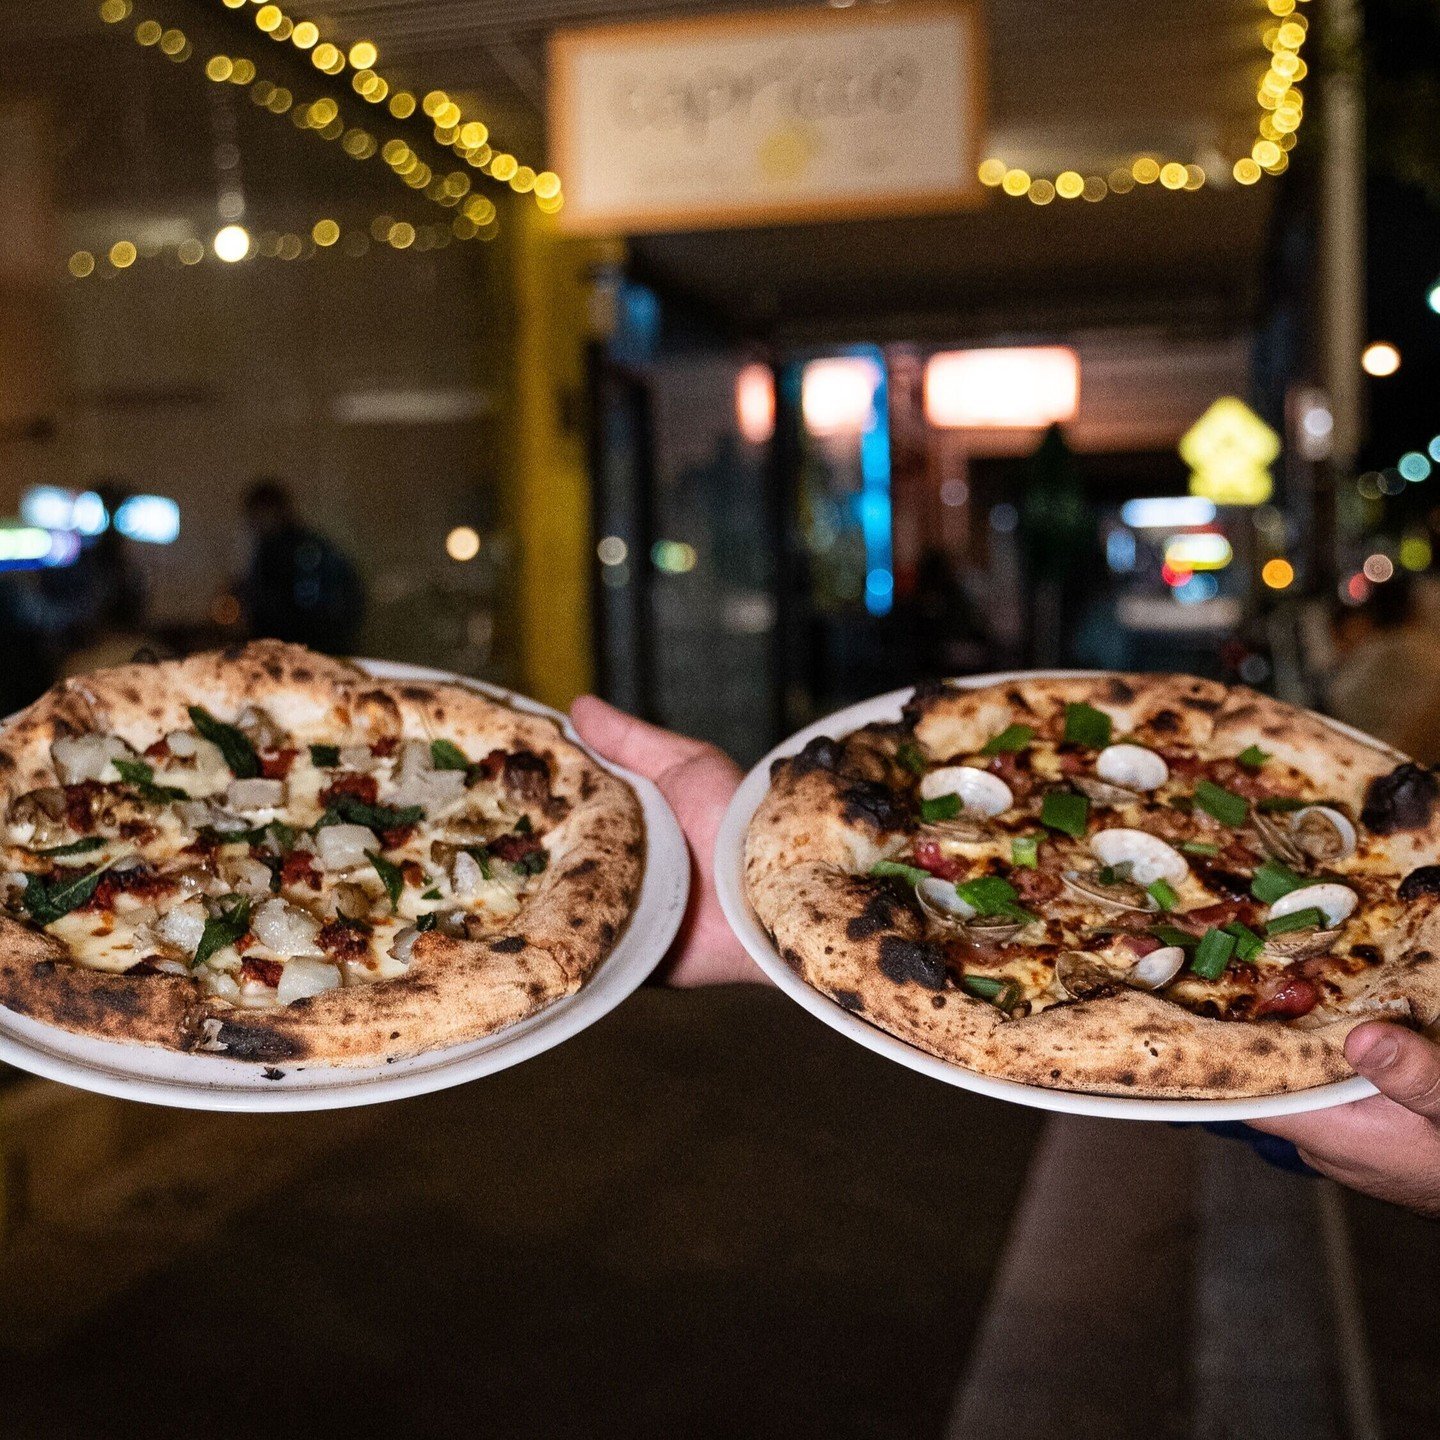 What's better than a pizza? TWO pizzas! 🍕🍕 Feast your eyes on Capriccio's (literally) hot sellers - Vongole Pizza &amp; Calabrese Pizza. Which one are you grabbing first? 🔥 #PizzaLovers 

Contact us!

☎️ 02 9572 7607
📍 159 Norton Street
Leichhard